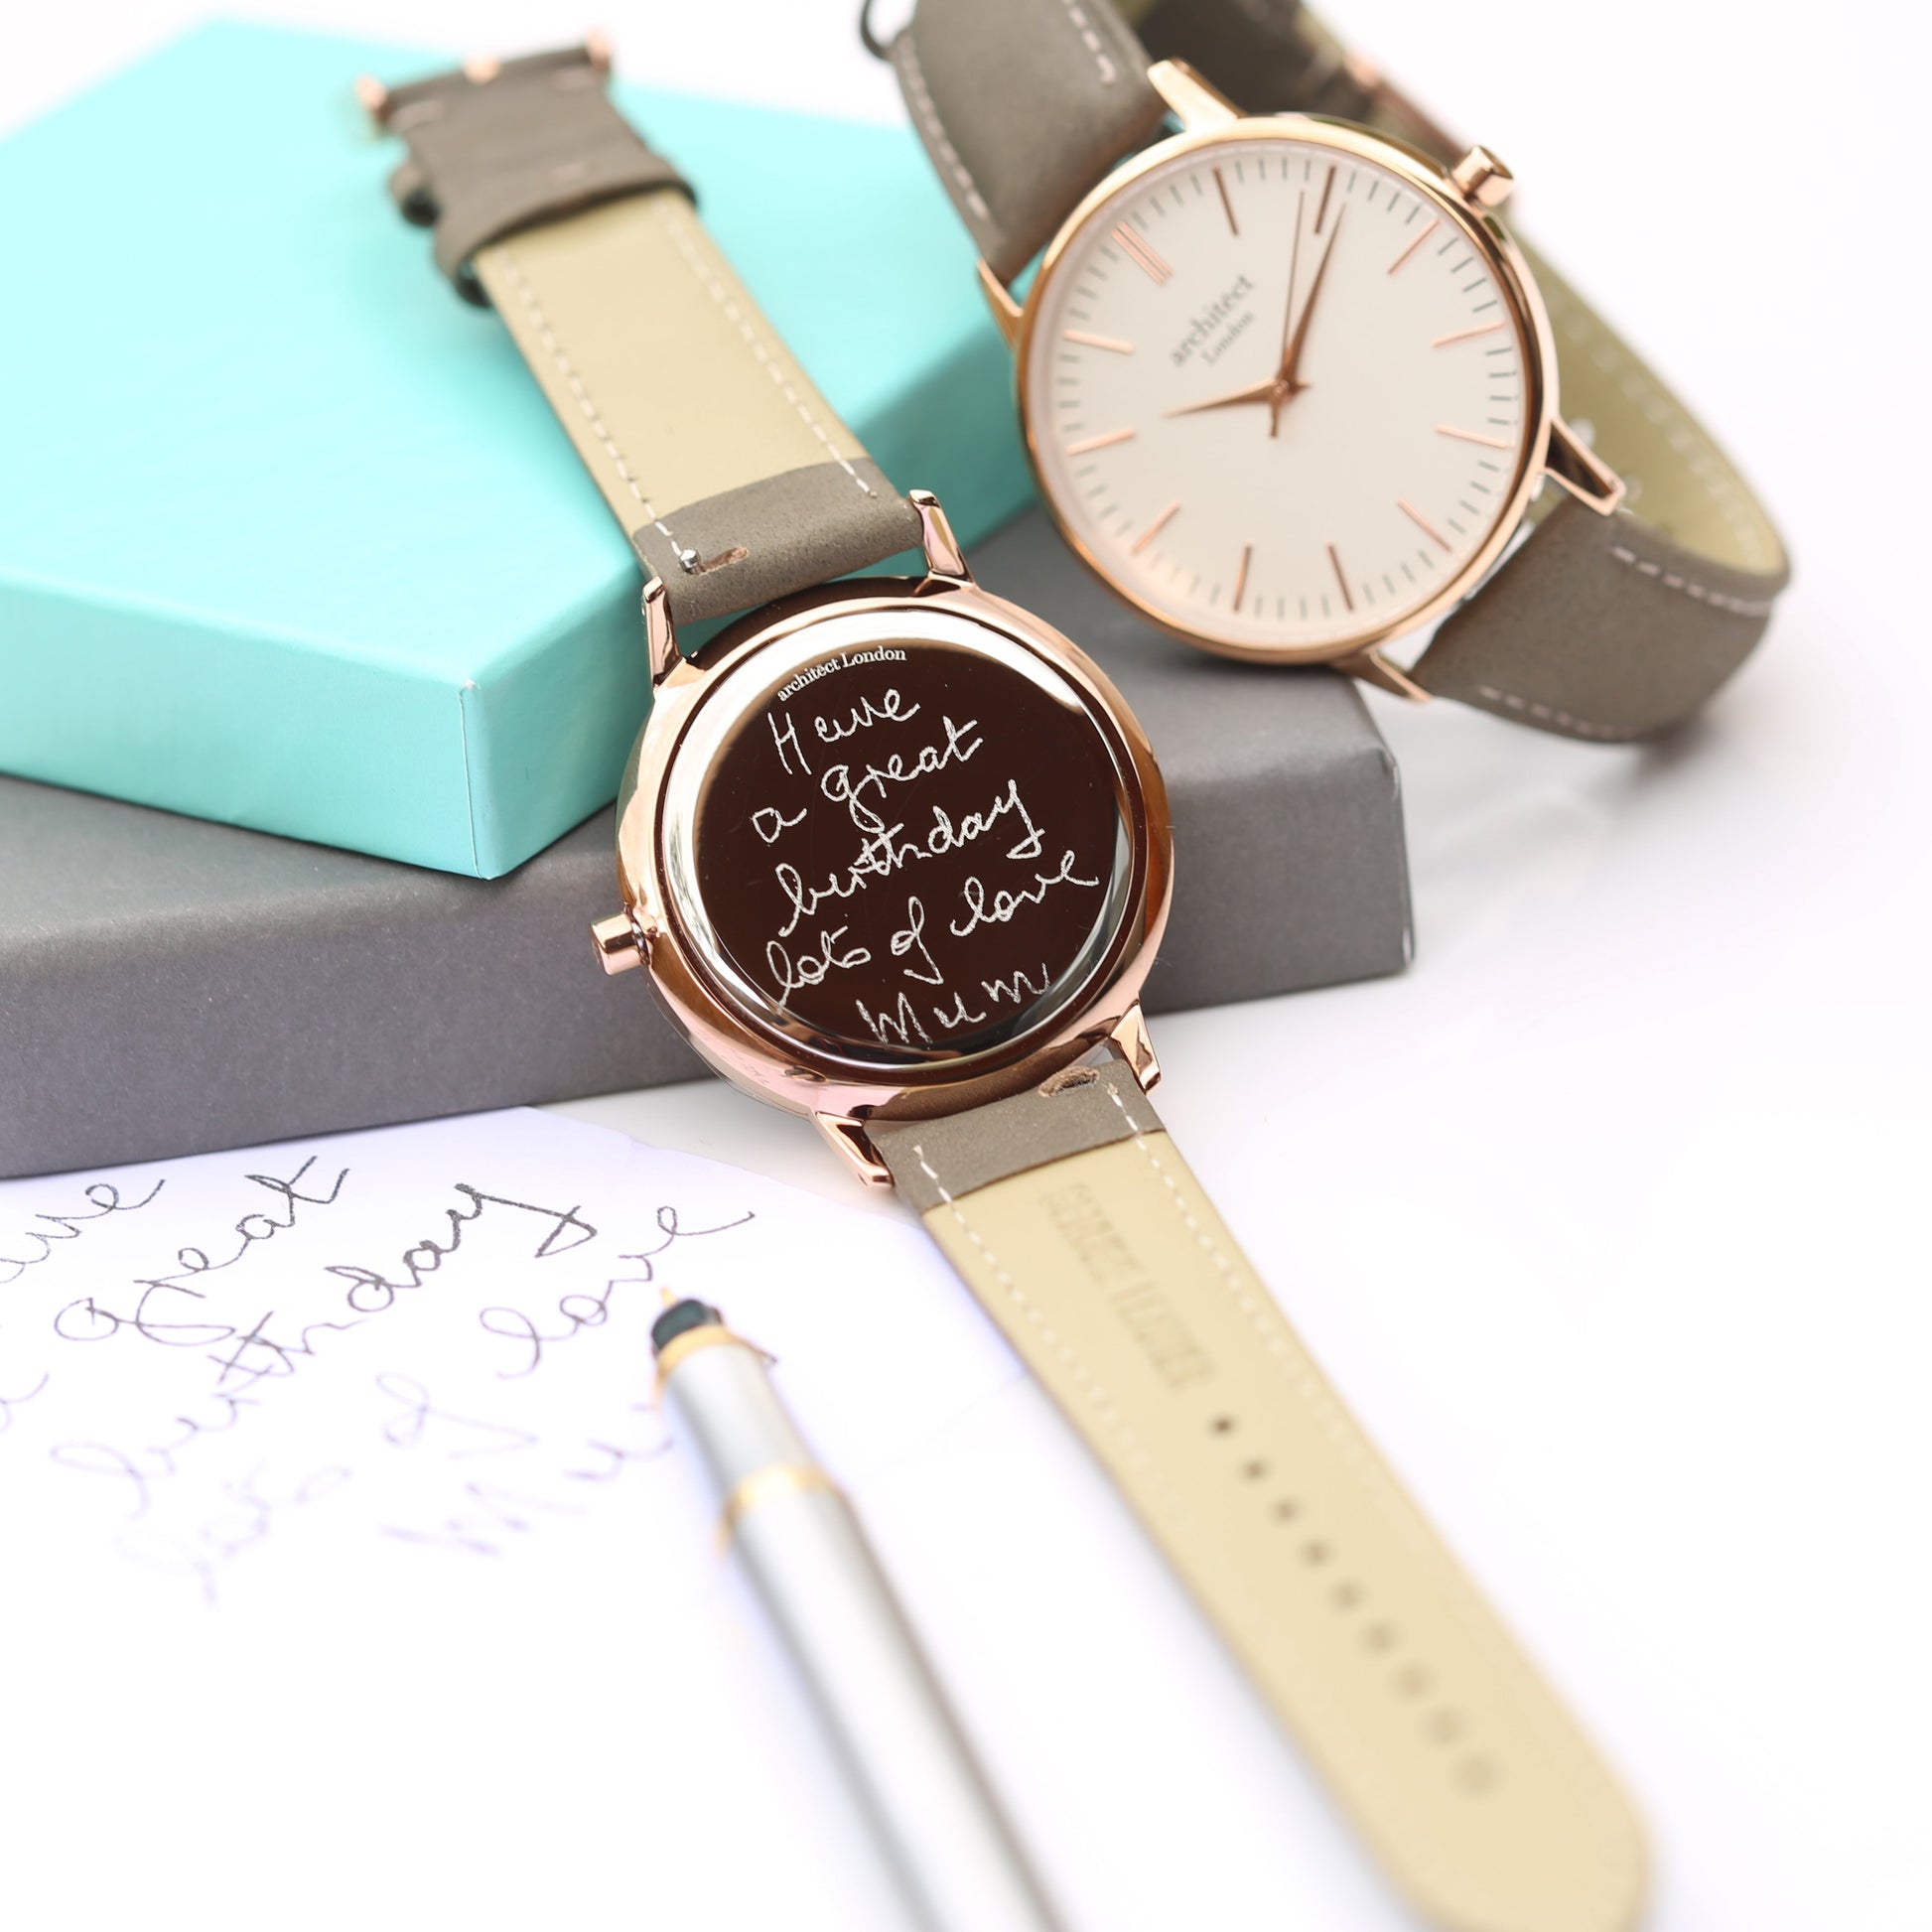 Personalized Ladies' Watches - Ladies Handwriting Engraved Watch in Light Grey 